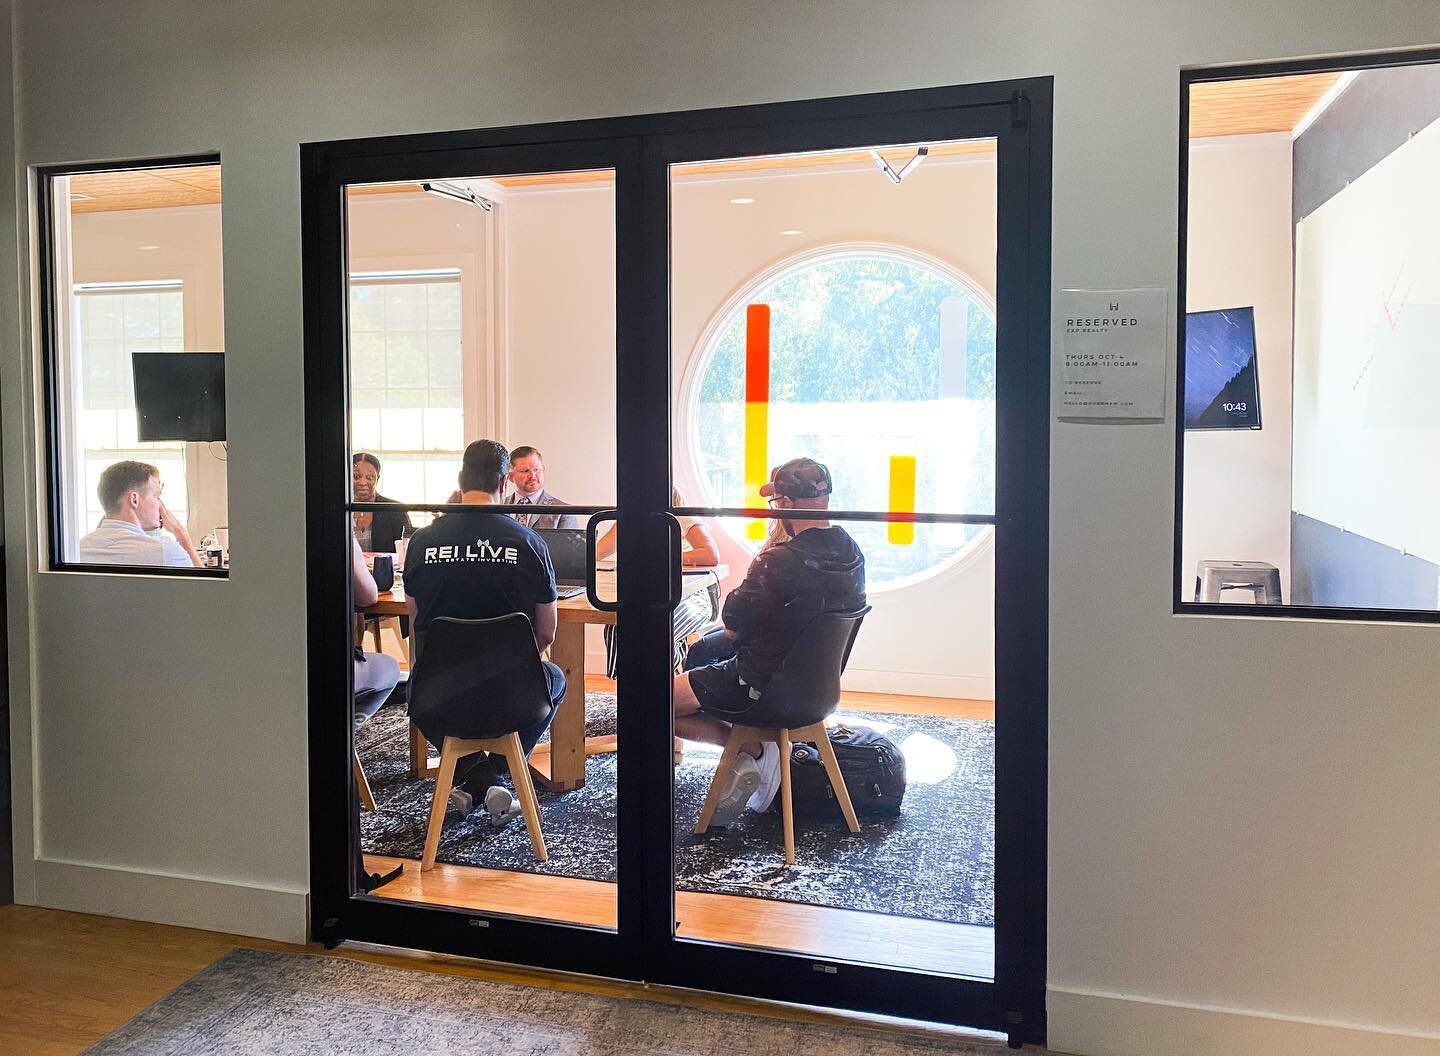 Looking for the perfect spot to meet with your team or clients?  Our large conference room is the place to be!  Chromecast screens, enormous whiteboards, Seeds Coffee service, and ample space give you everything you need to have a great and productiv